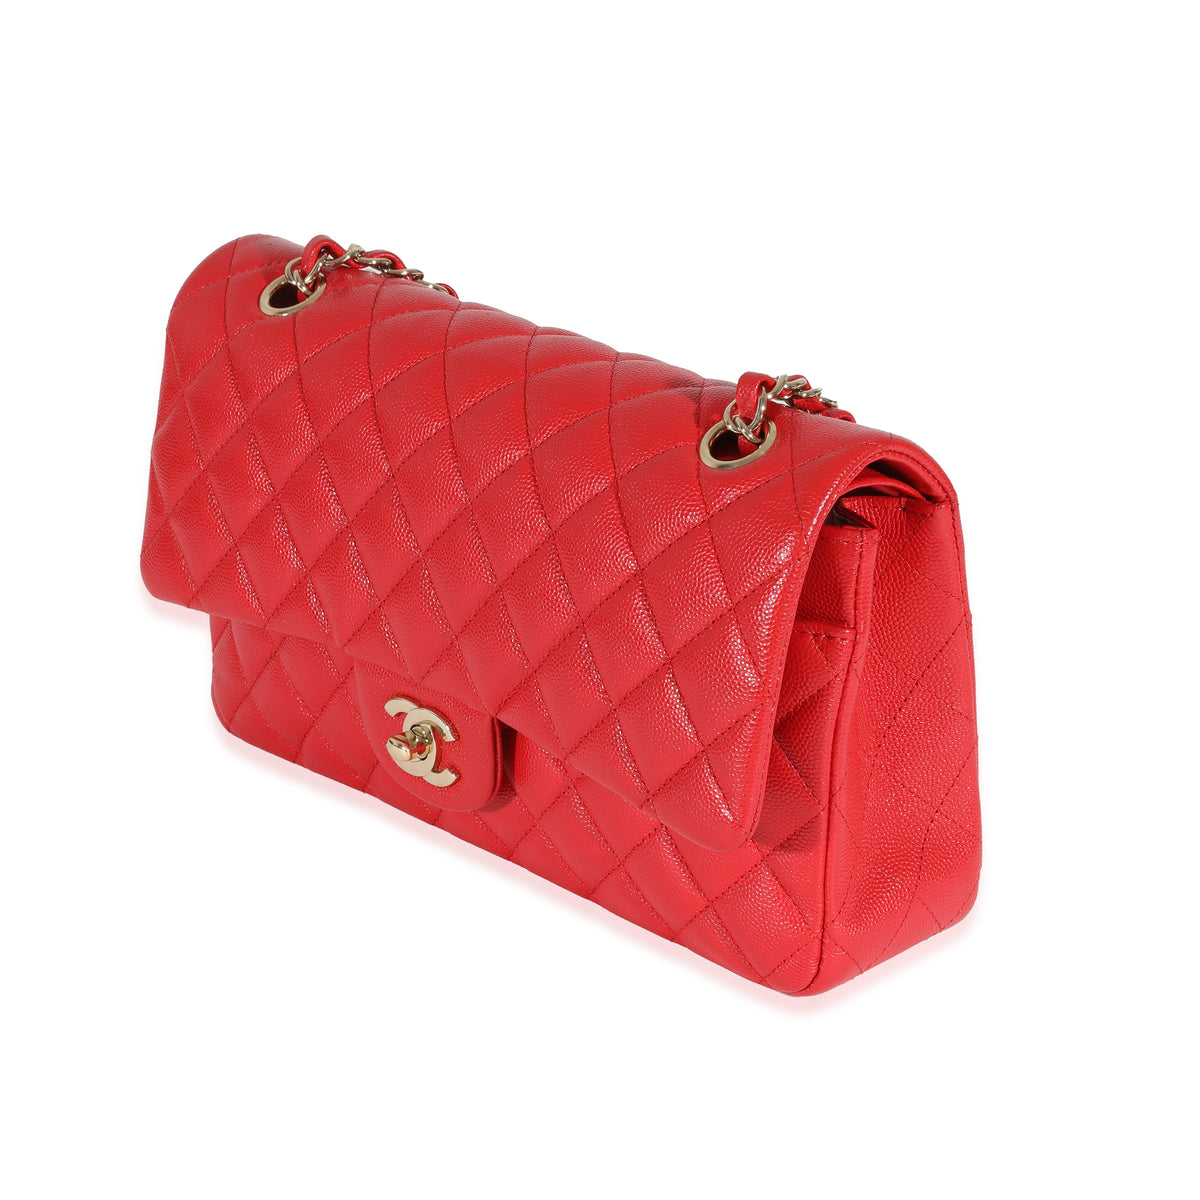 Chanel Deauville Large 21S Hot Pink, New in Dustbag